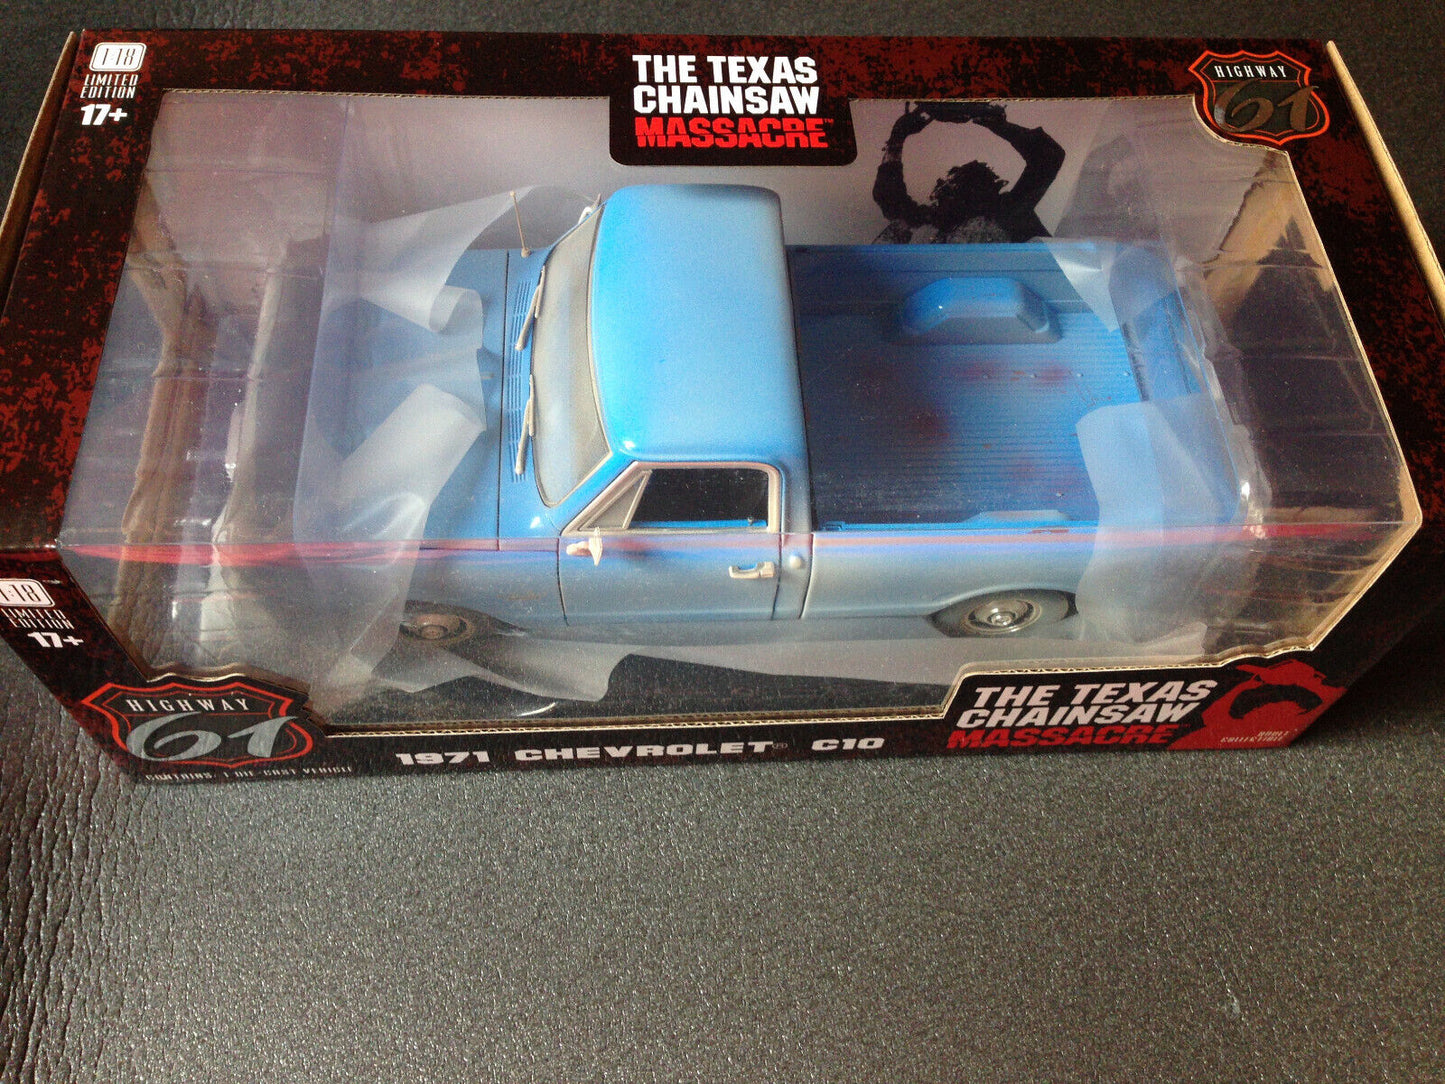 Chevrolet C10 1971 C-10 The Texas Chainsaw Massacre Highway61 Pick Up Truck 1:18